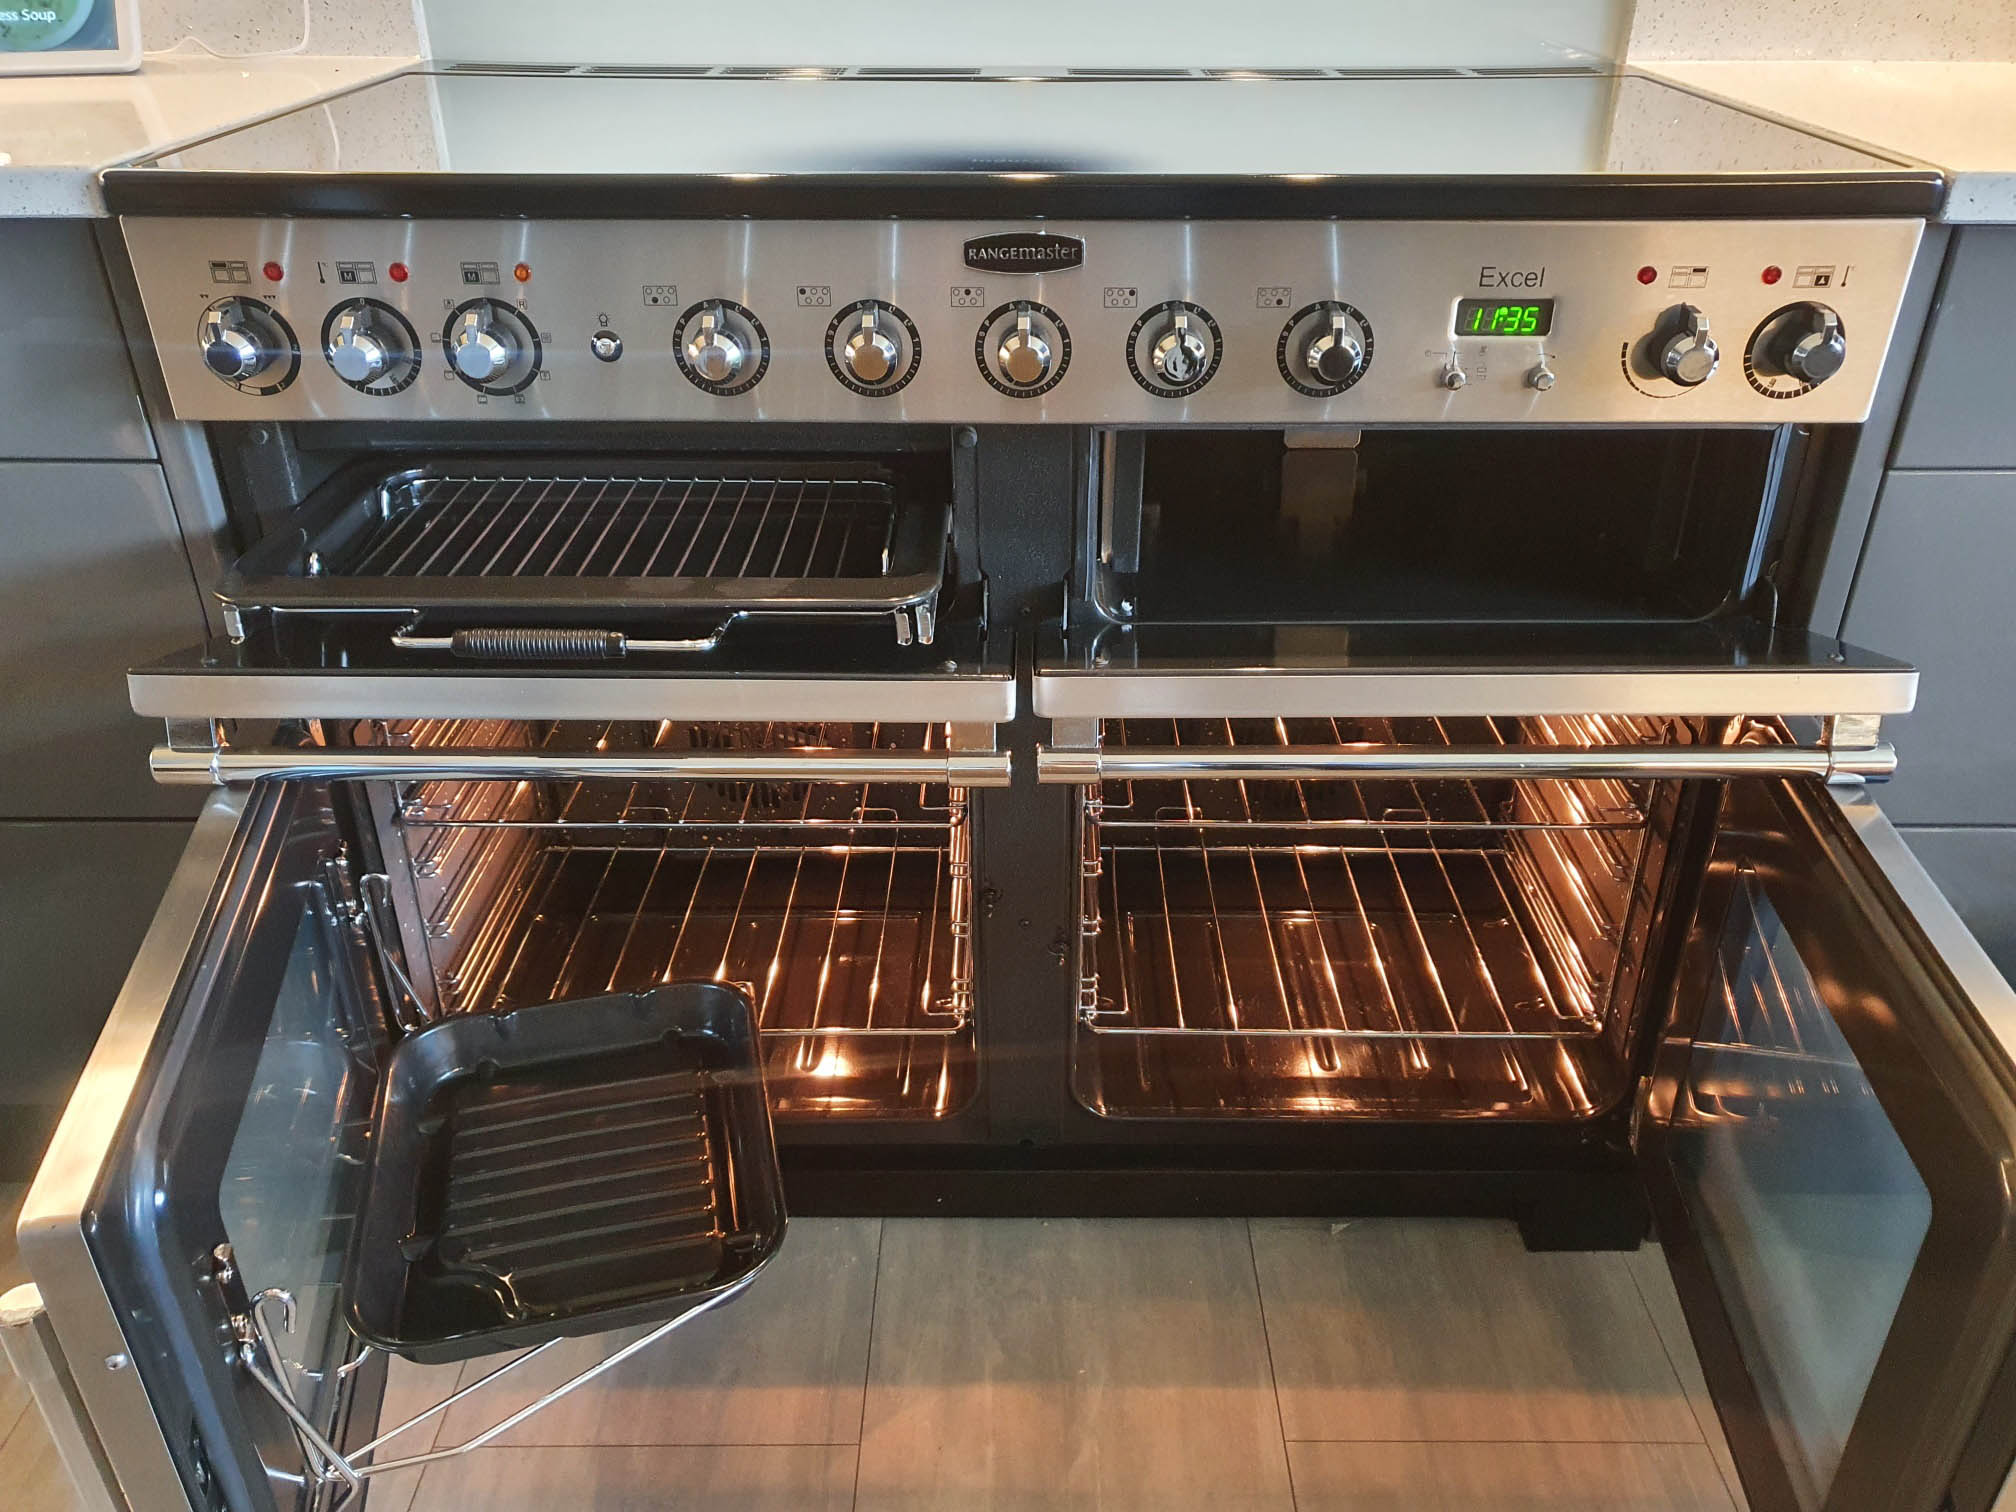 Double Oven Cleaning Belfast | Clean Oven Belfast | Oven Cleaning NI | Oven Clean ni | Kitchen Cleaning NI | Oven Cleaning Belfast | Kitchen Appliance Cleaning Belfast | Oven Clean NI